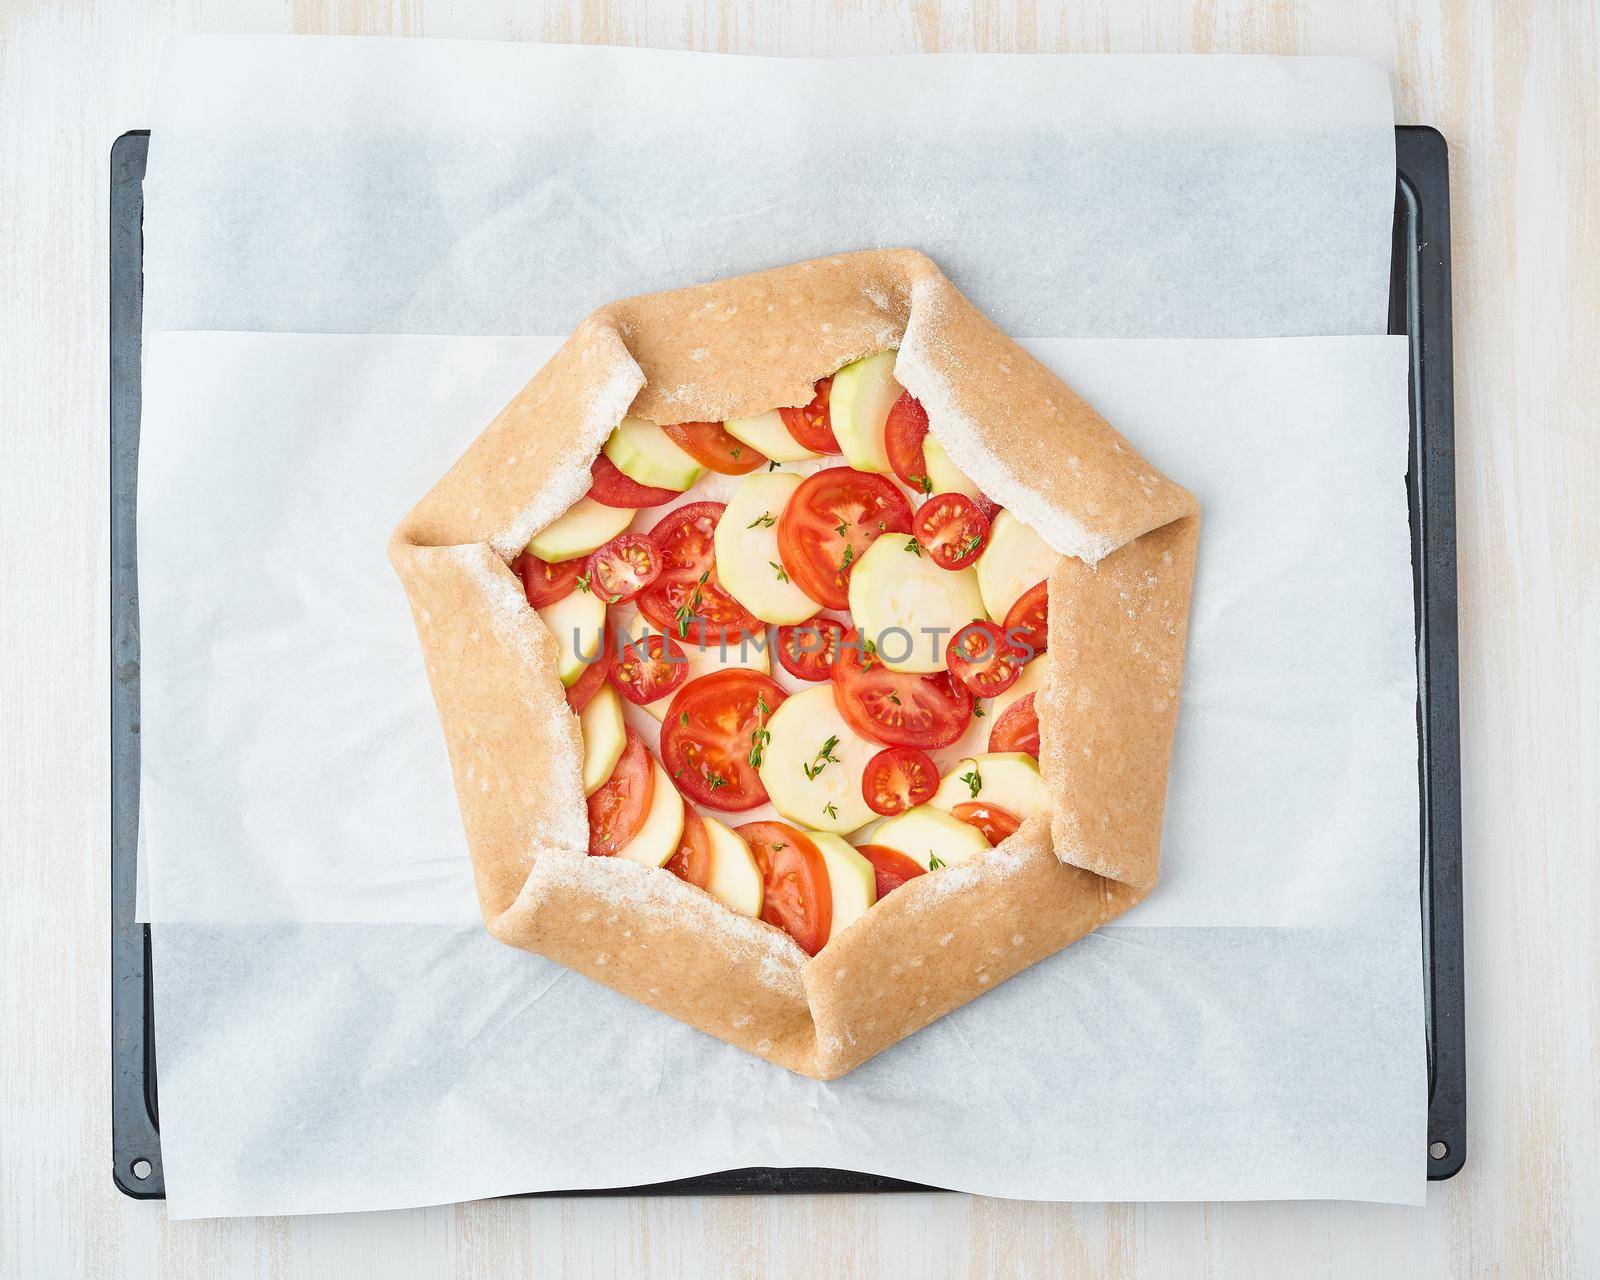 Step by step recipe. Raw homemade galette with vegetable. Top view, white wooden table